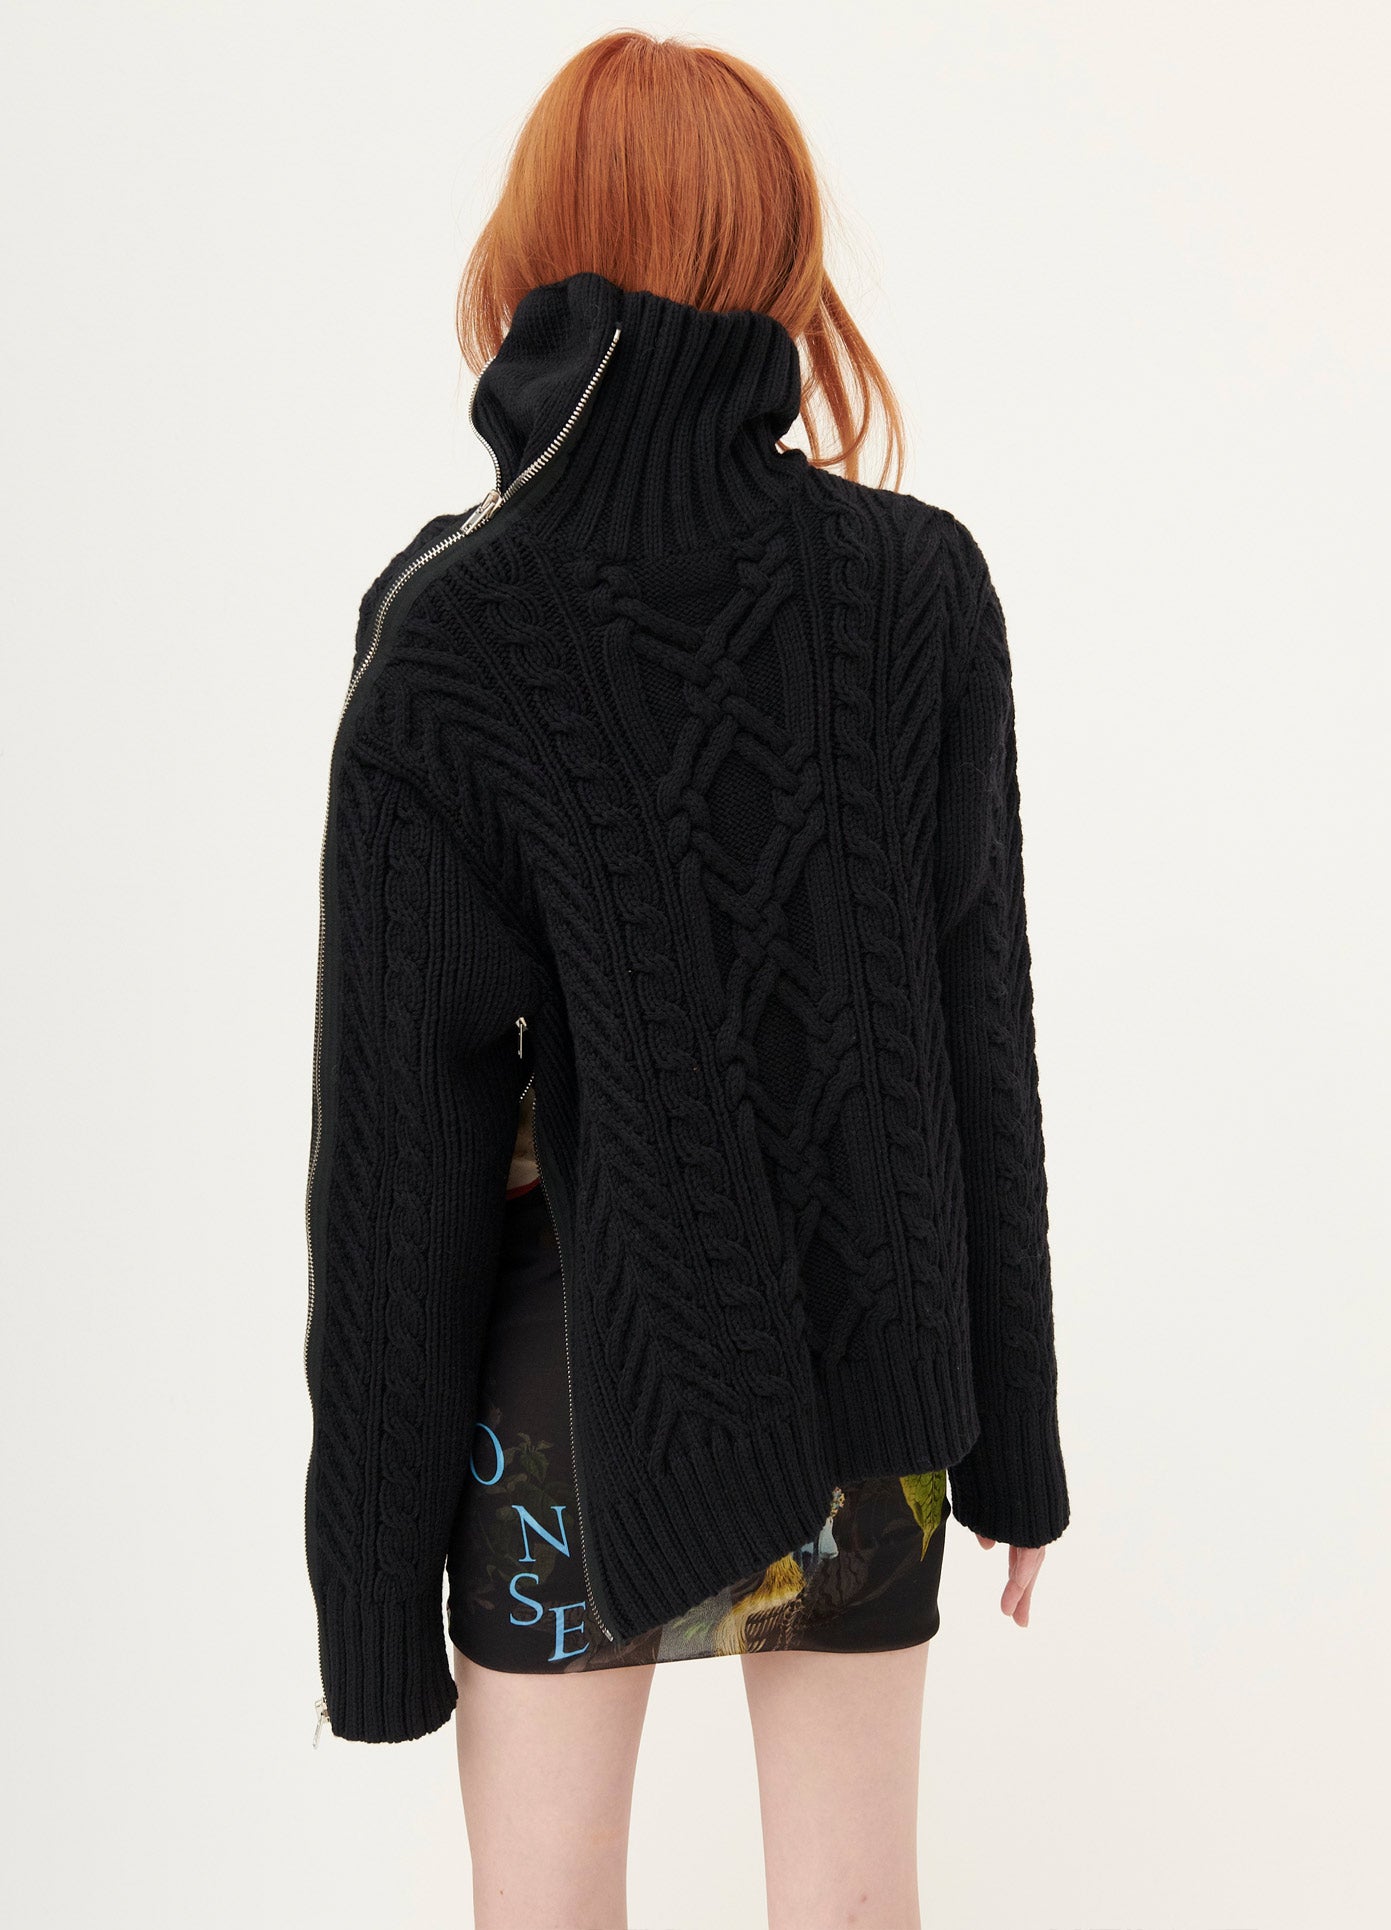 MONSE Turtleneck Zipper Detail Cable Sweater in Black on Model Back View